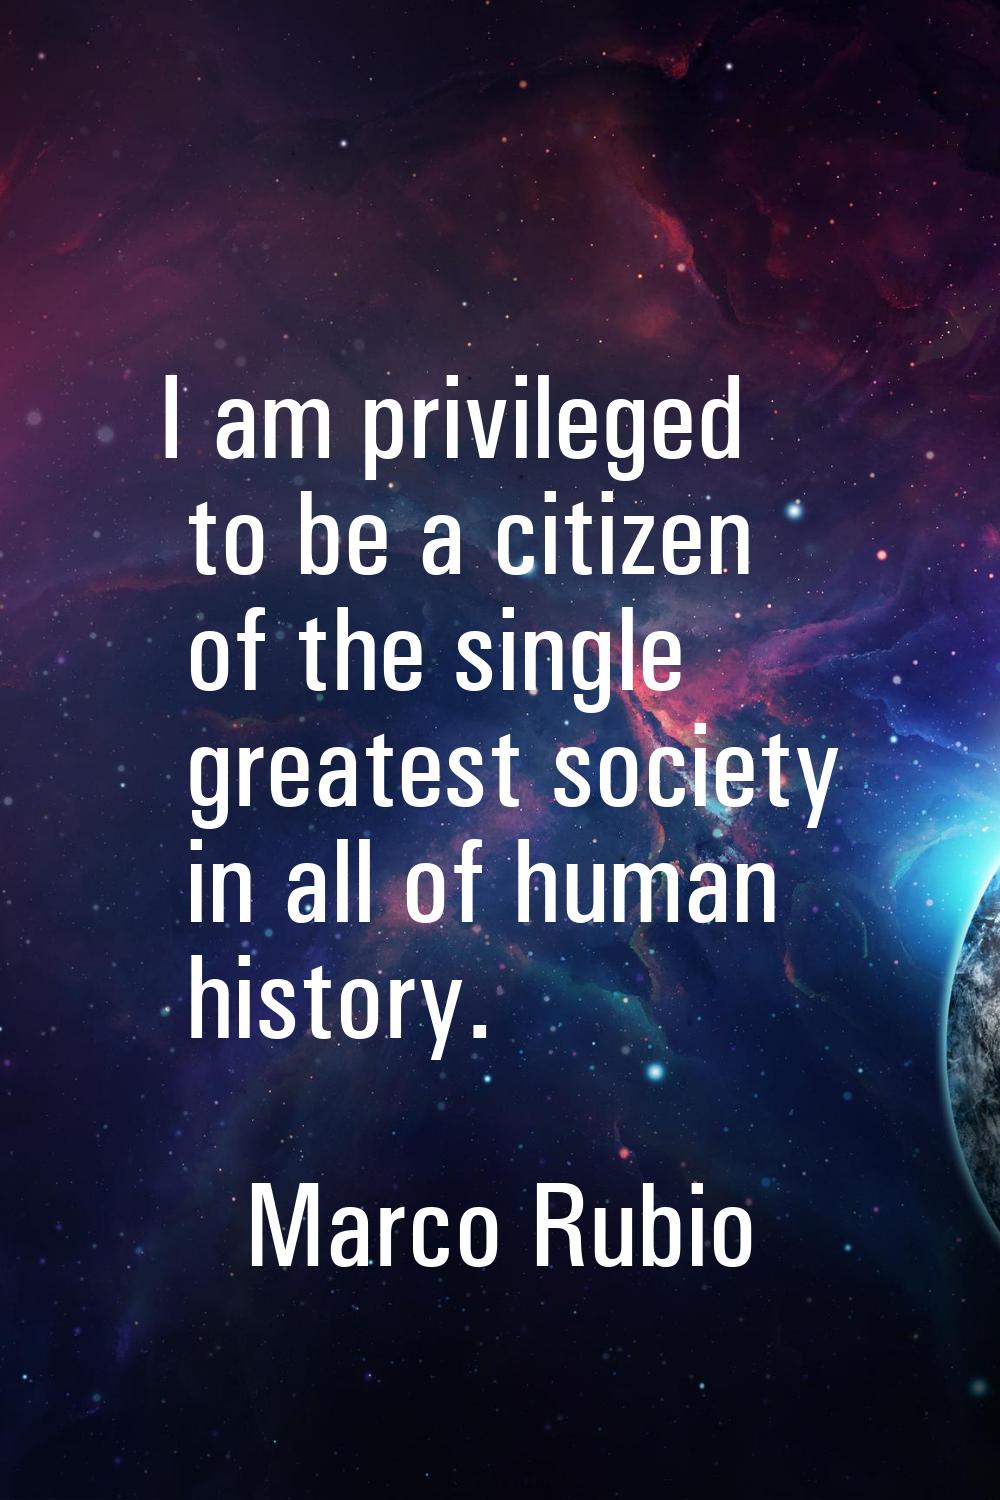 I am privileged to be a citizen of the single greatest society in all of human history.